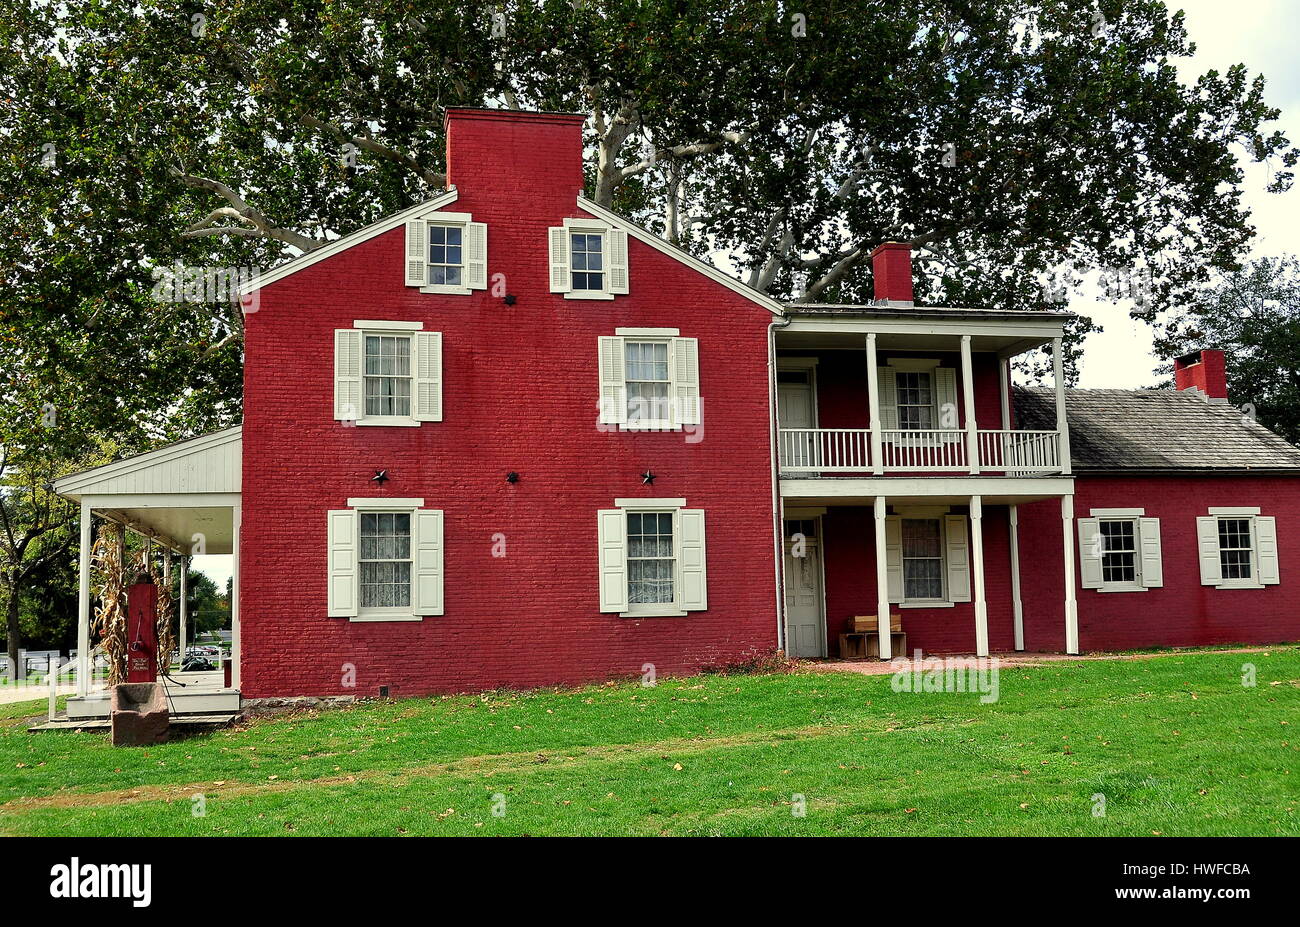 Lancaster, Pennsylvania - October 14, 2015:  1856 Landis Valley House Hotel built by Jacob Landis, Jr. at the Landis Valley Village and Farm Museum Stock Photo